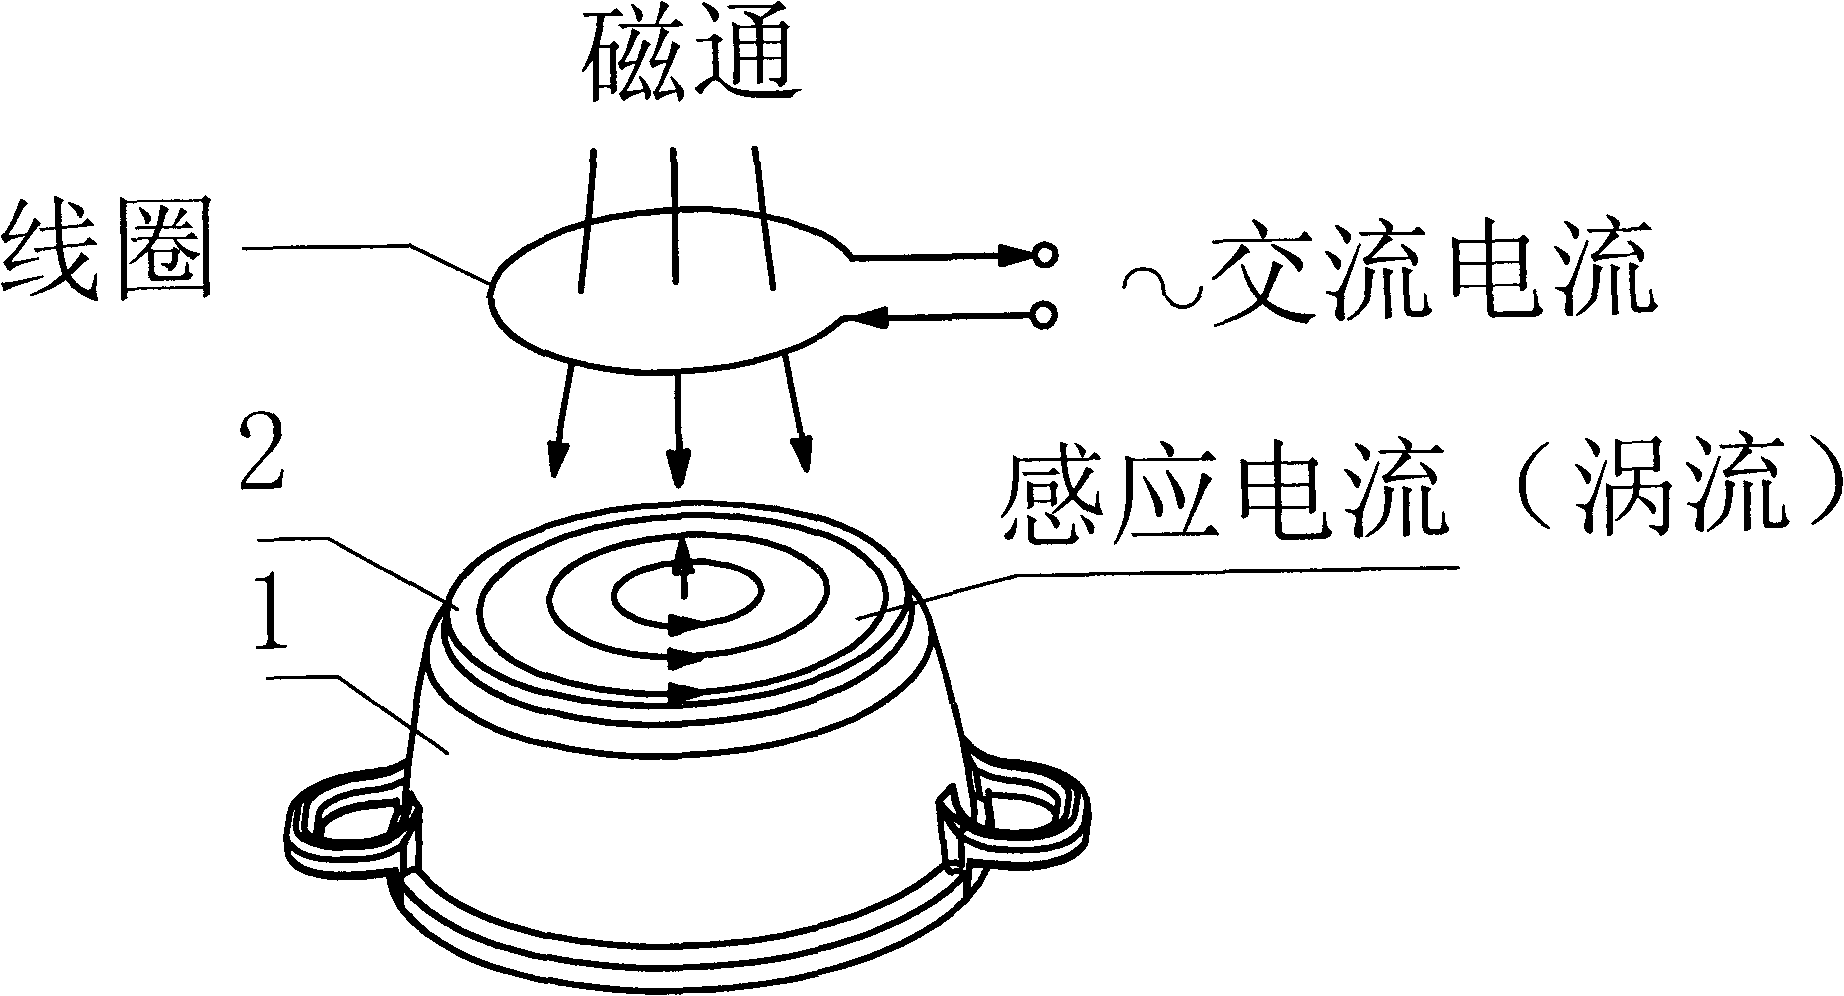 Aluminium alloy compression casting pan with compound bottom and compound technique thereof